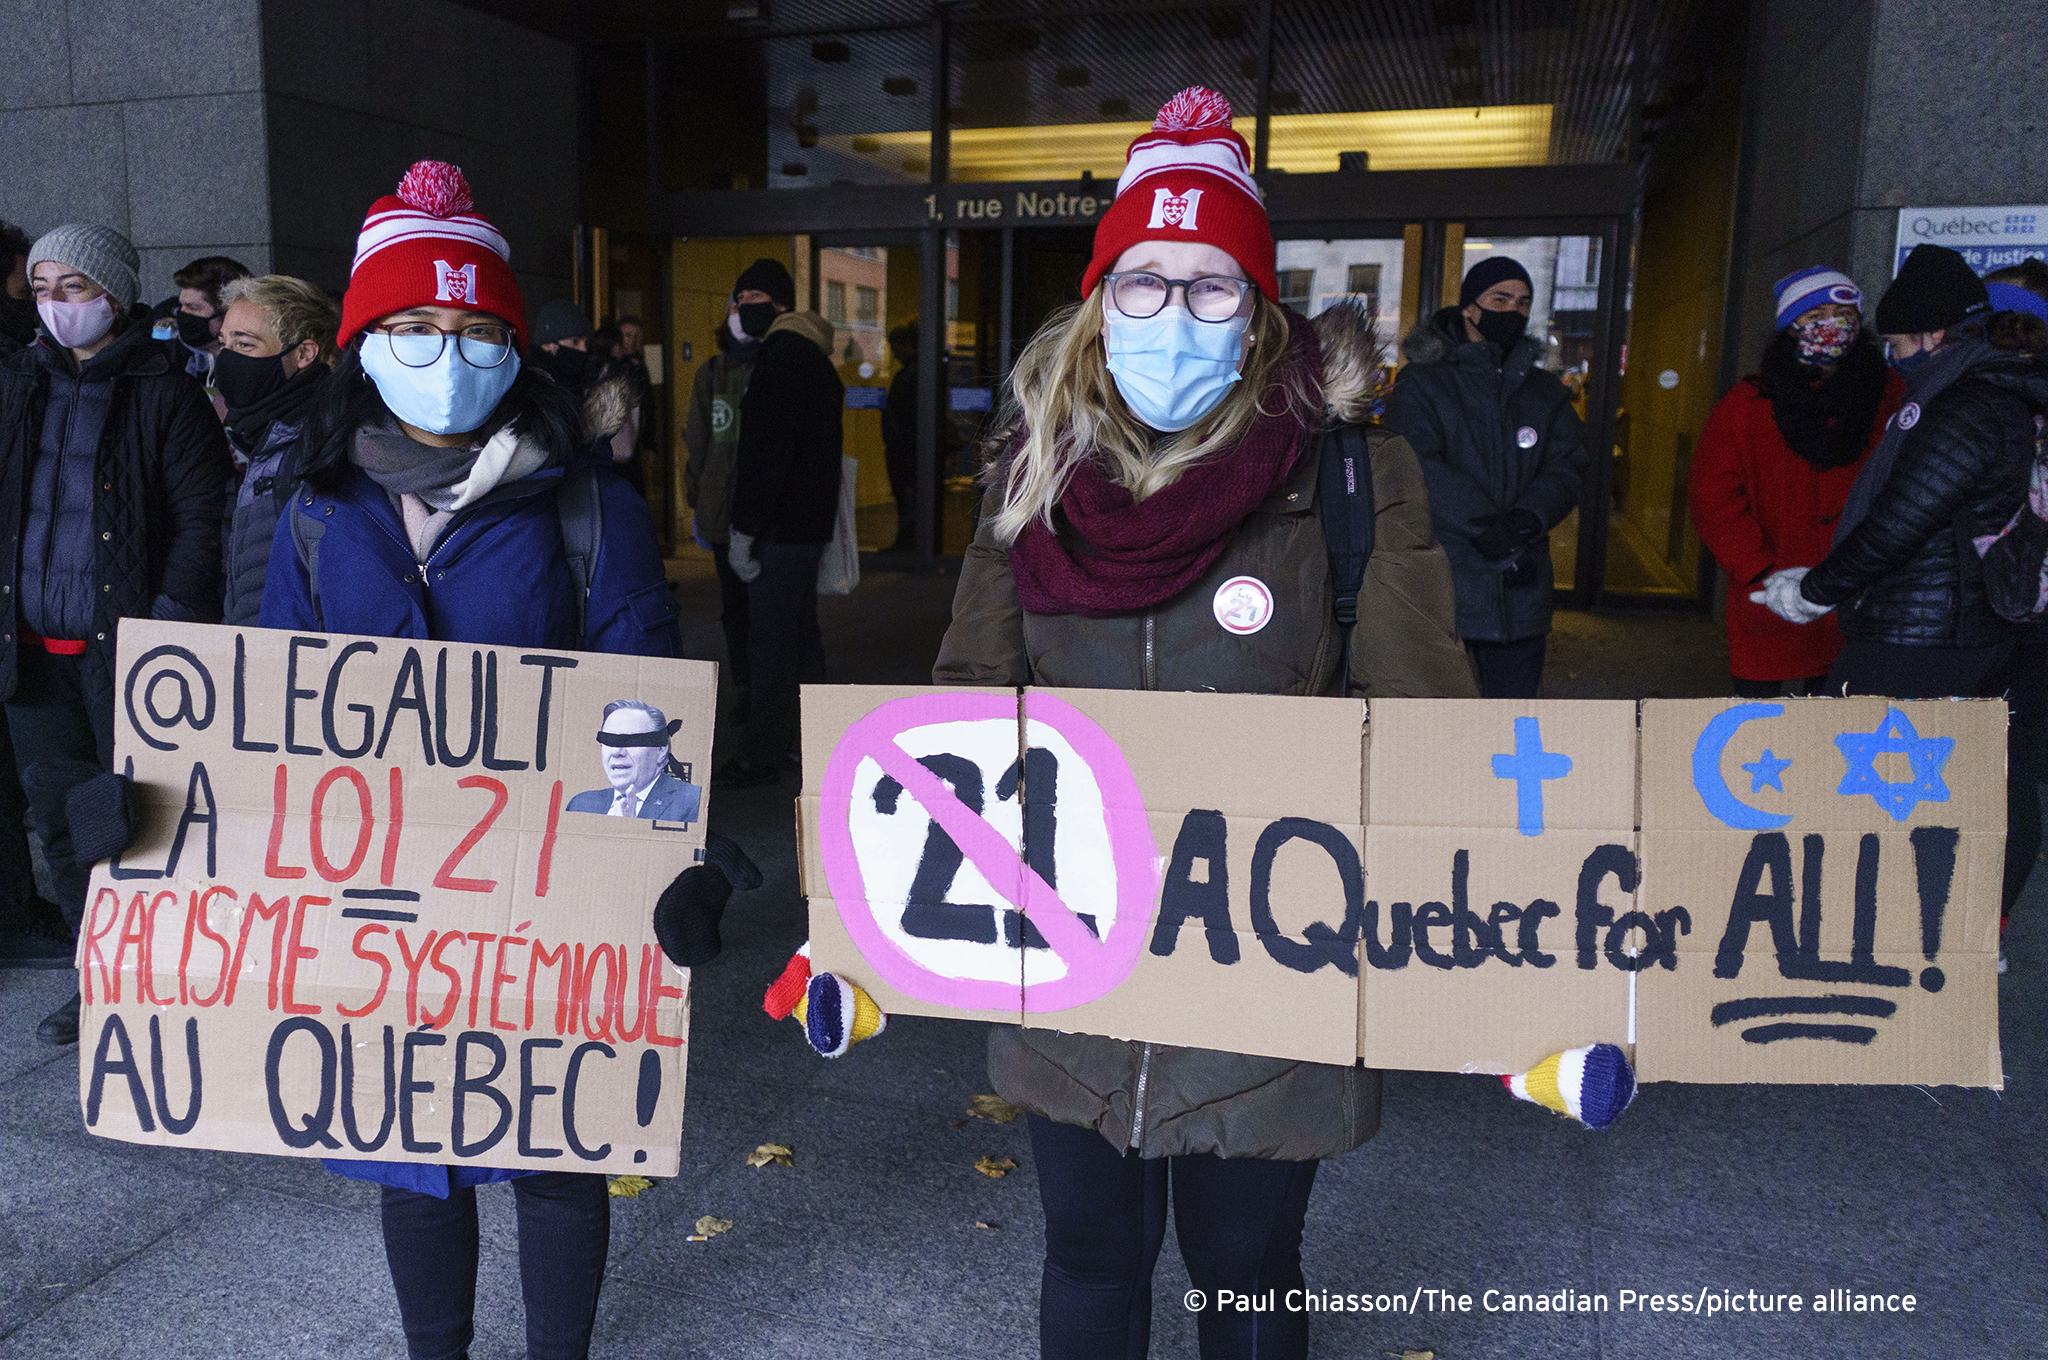 Demonstrators stand outside the courthouse on the first day of the constitutional challenge to Bill 21, which bans public workers in positions of "authority" from wearing religious symbols, before the Quebec Superior Court in Montreal on 2 November 2020 (photo: THE CANADIAN PRESS/Paul Chiasson)